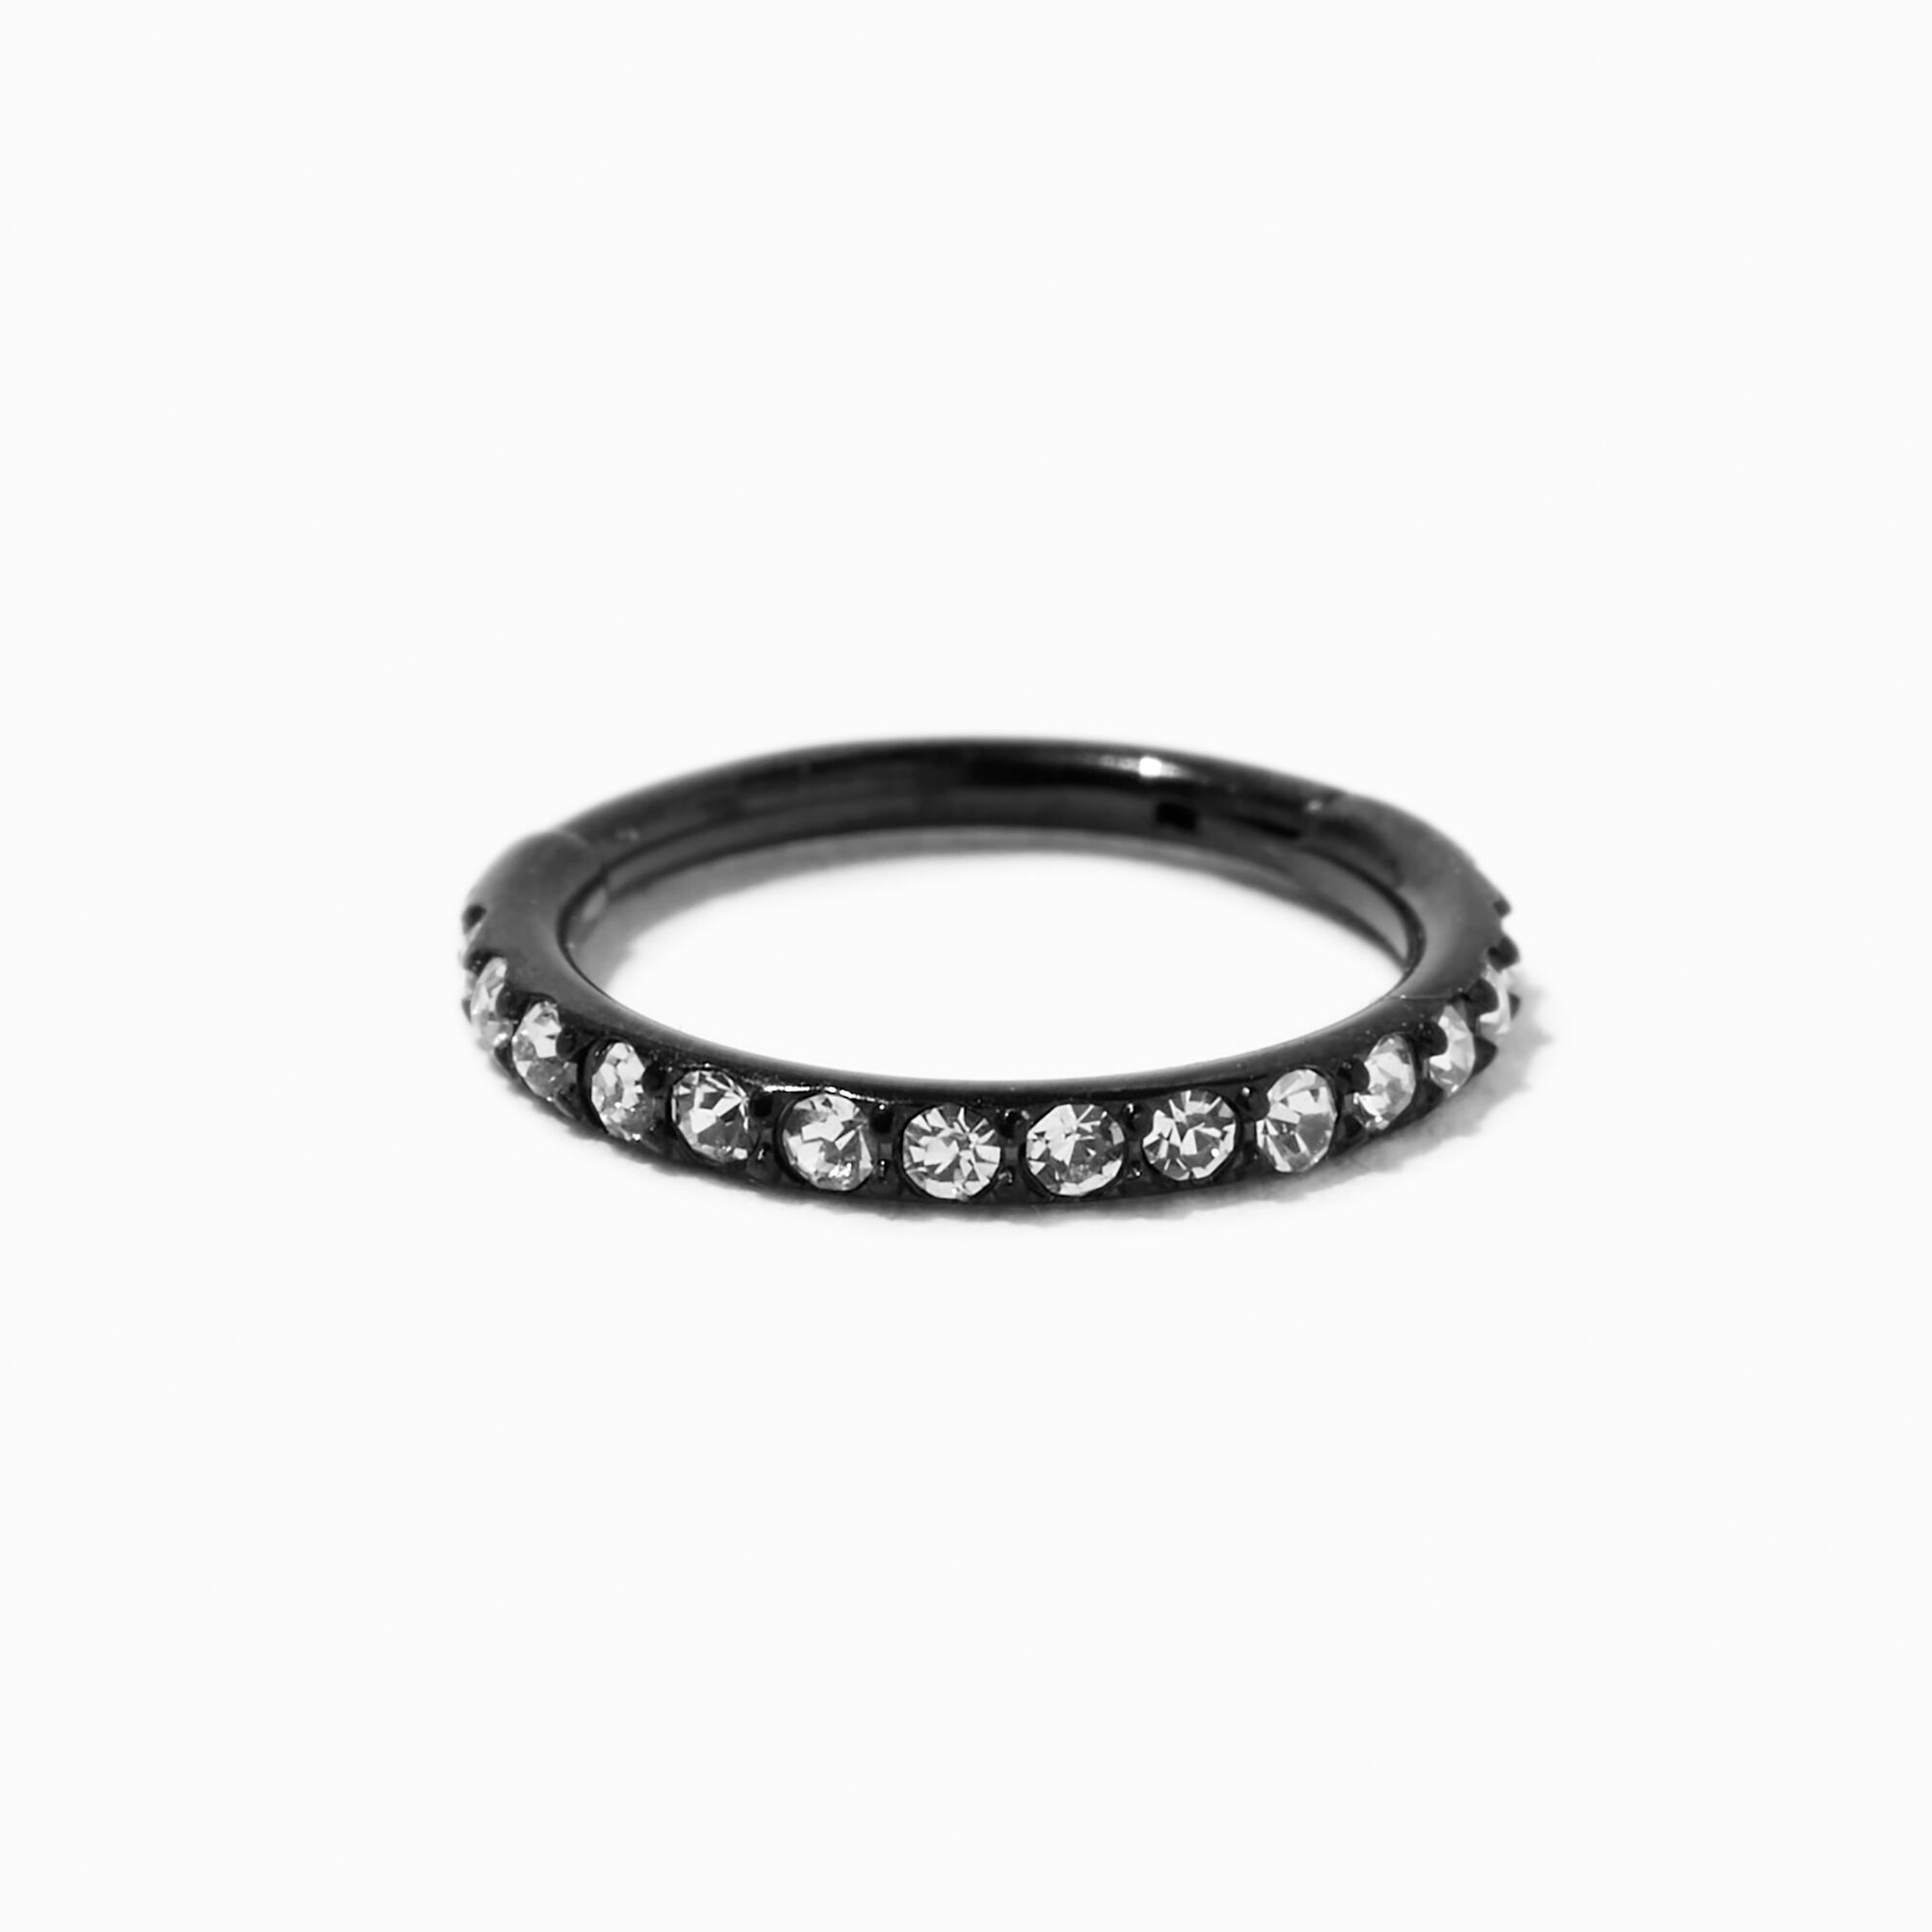 View Claires Titanium 18G Crystal Hoop Clicker Nose Black information